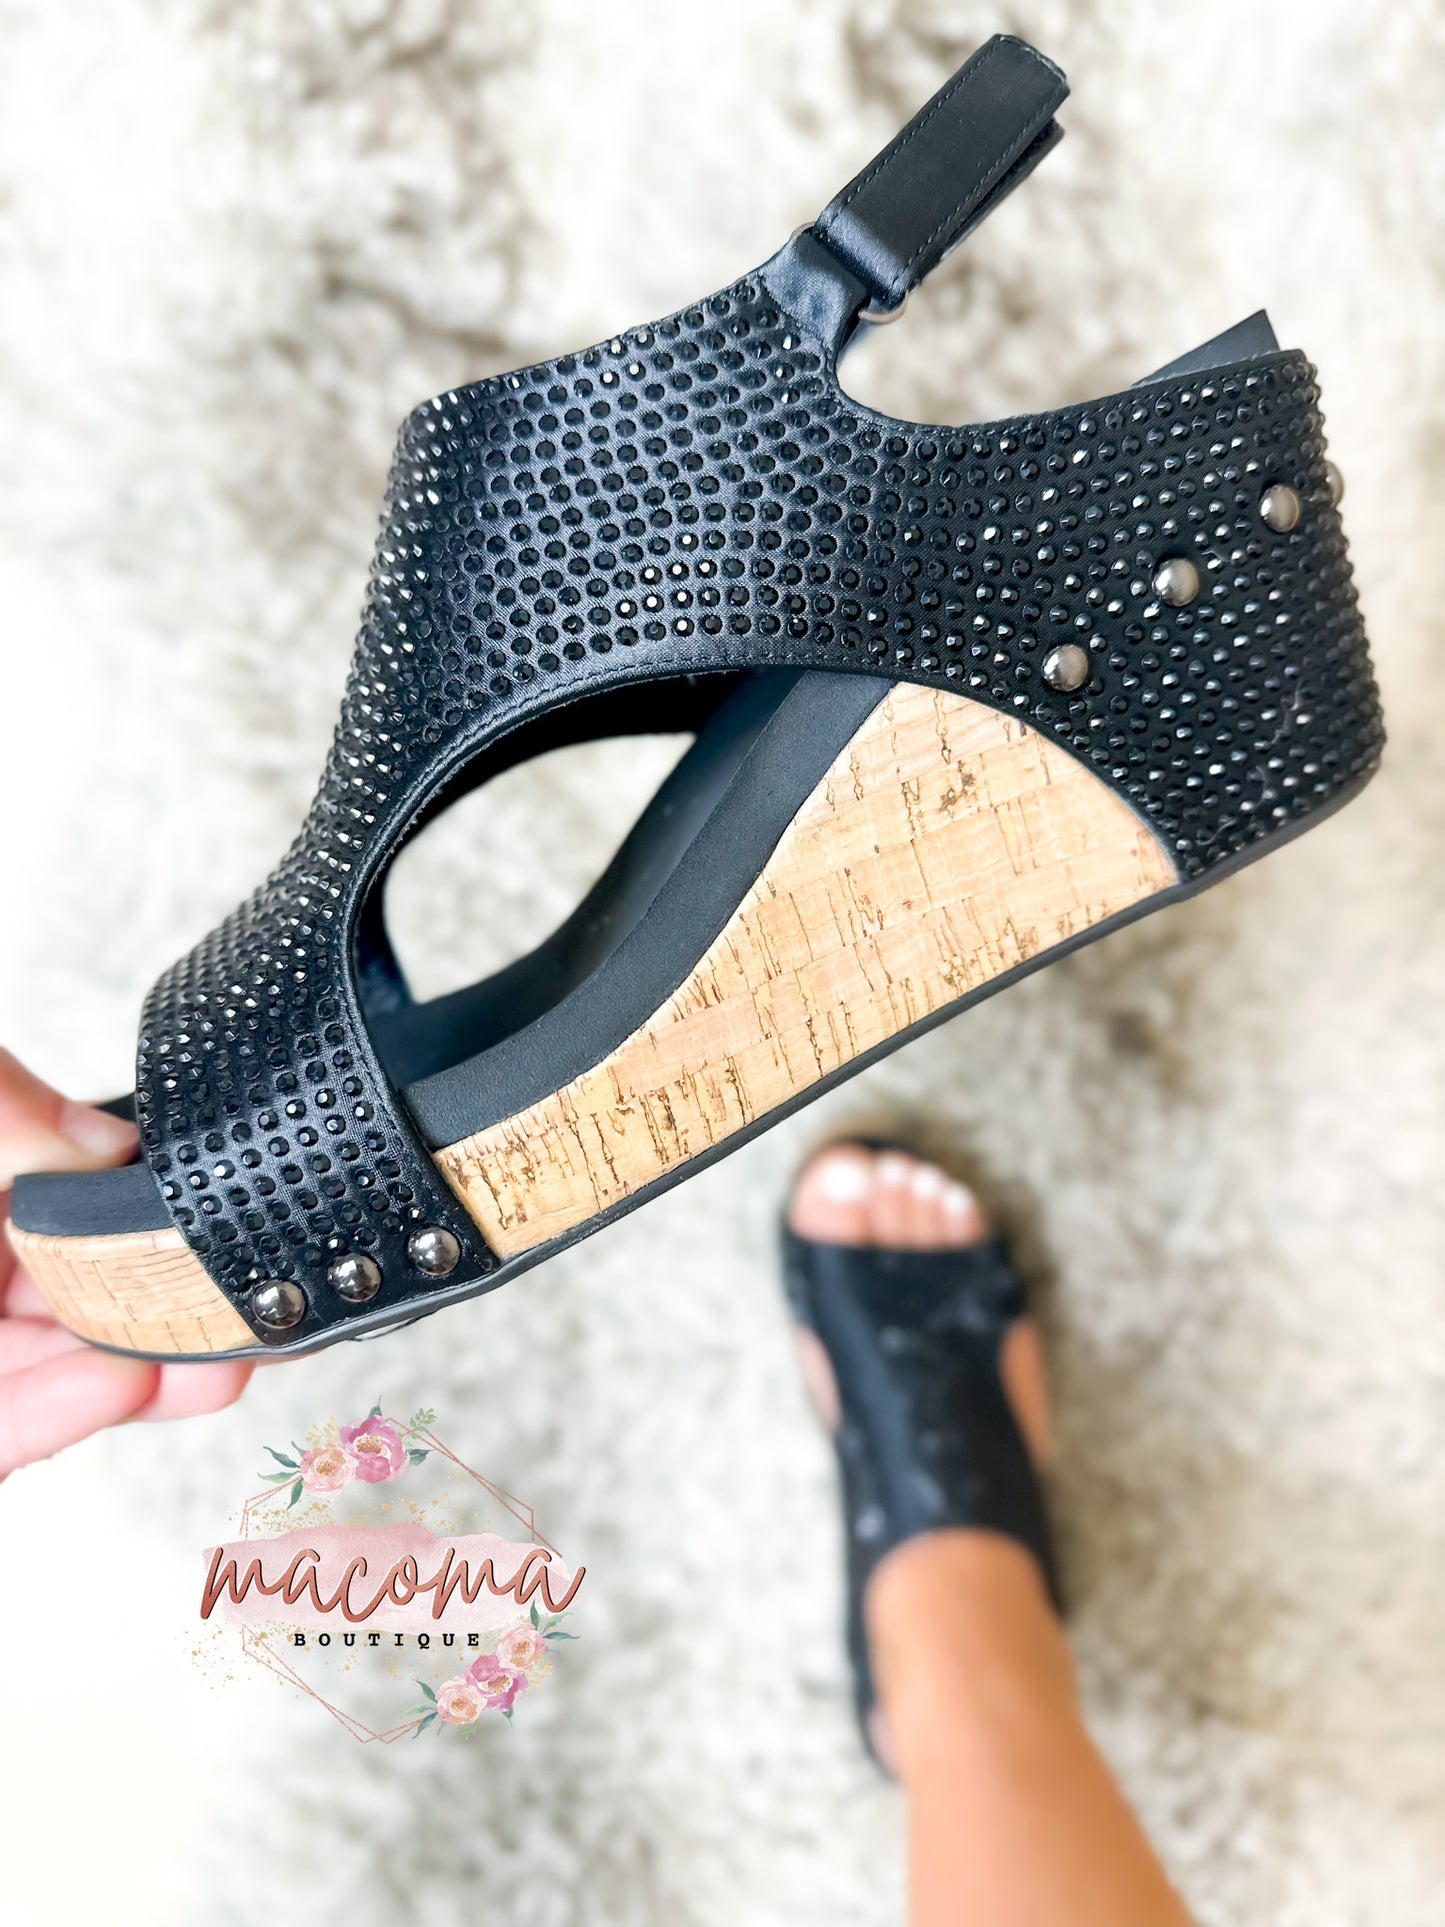 Corky's Black Crystals Carley Sandals